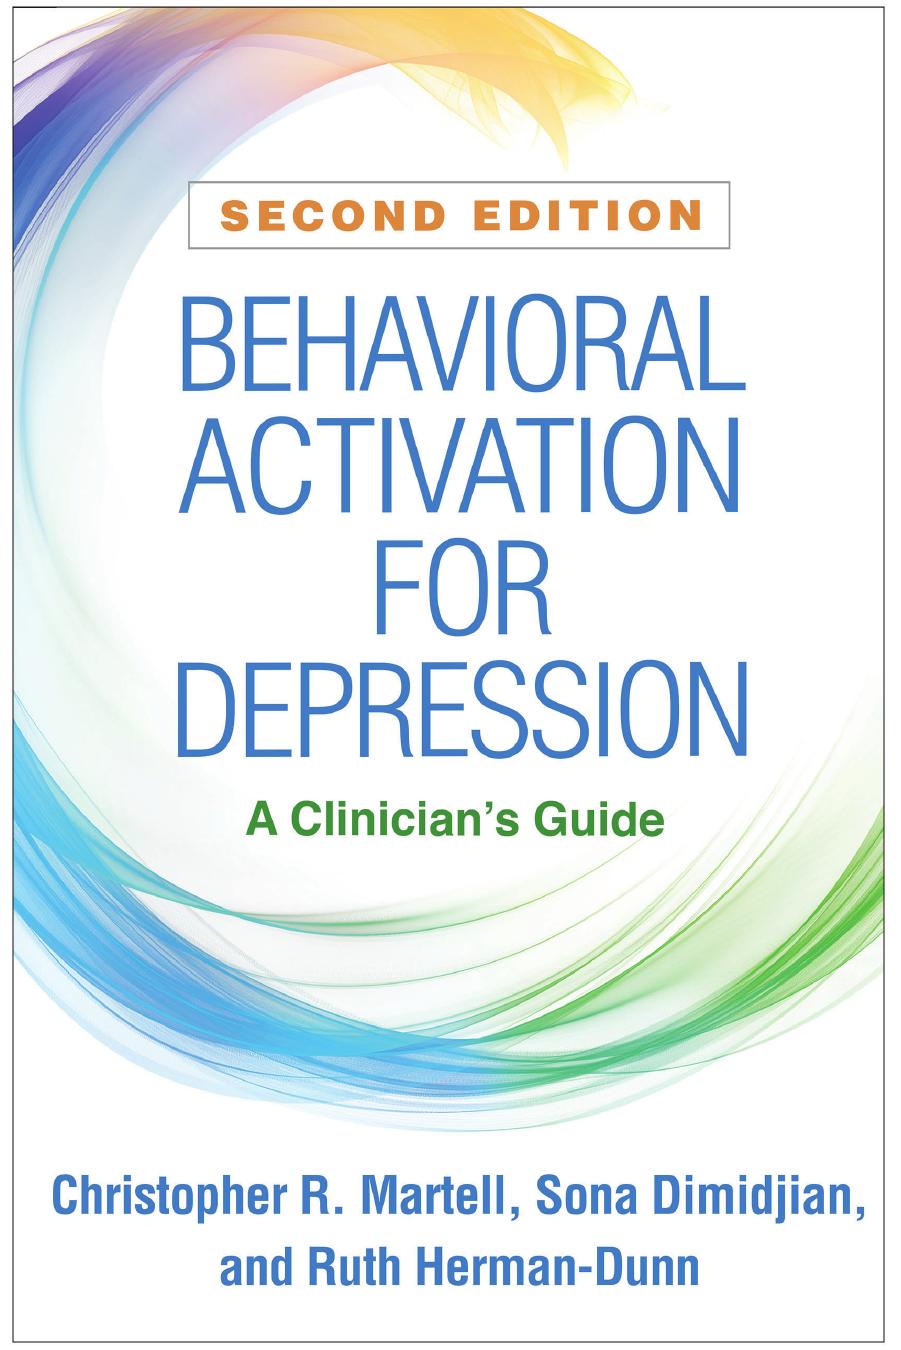 Behavioral Activation for Depression: A Clinician's Guide - 2nd. Edition